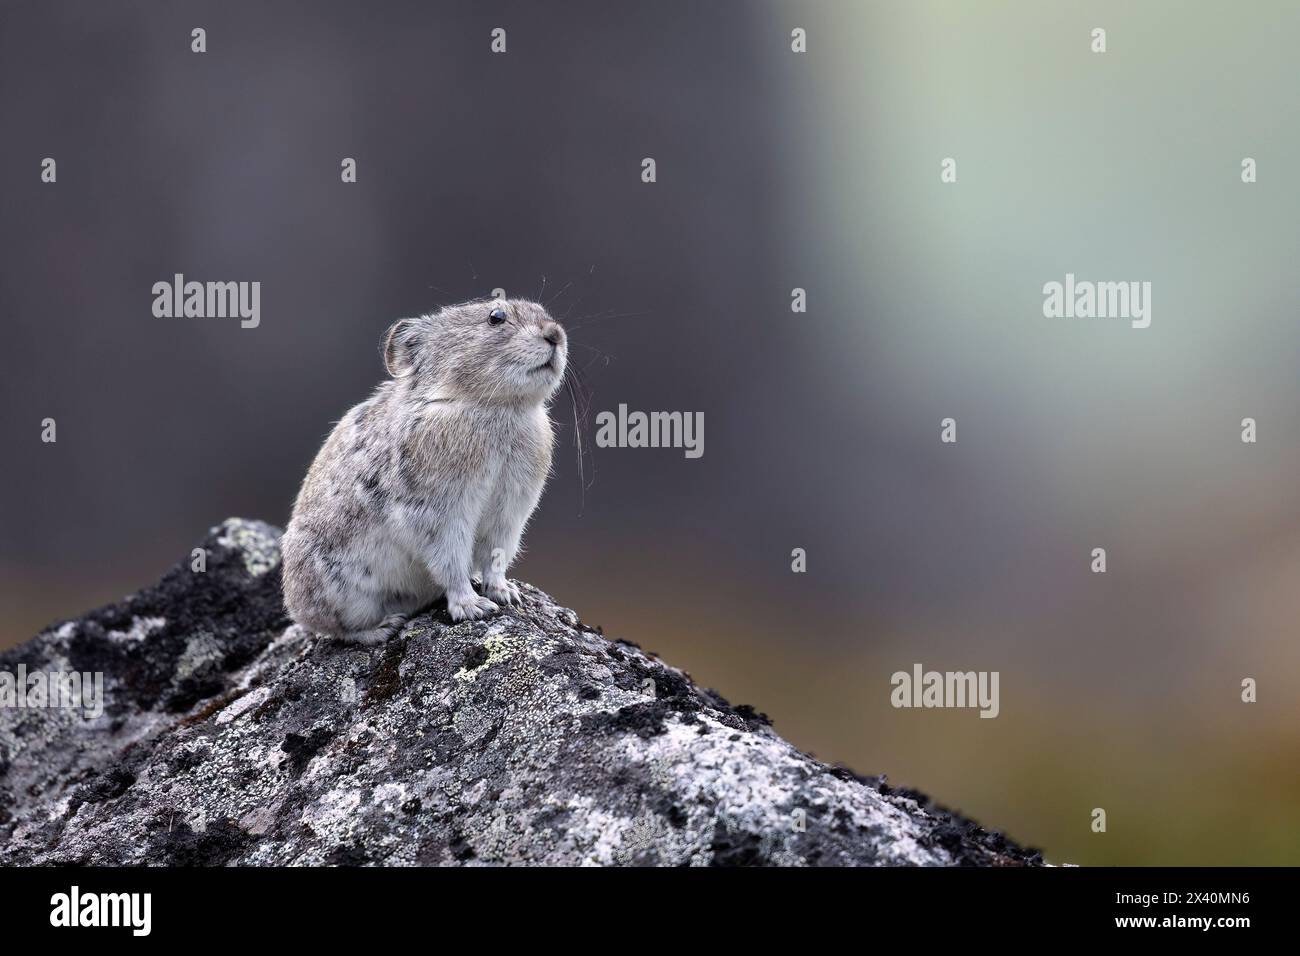 Collared pika (Ochotona collaris) stands watch high in Alaska's Hatcher Pass in the Talkeetna Mountains north of Palmer. Pikas are not rodents but ... Stock Photo